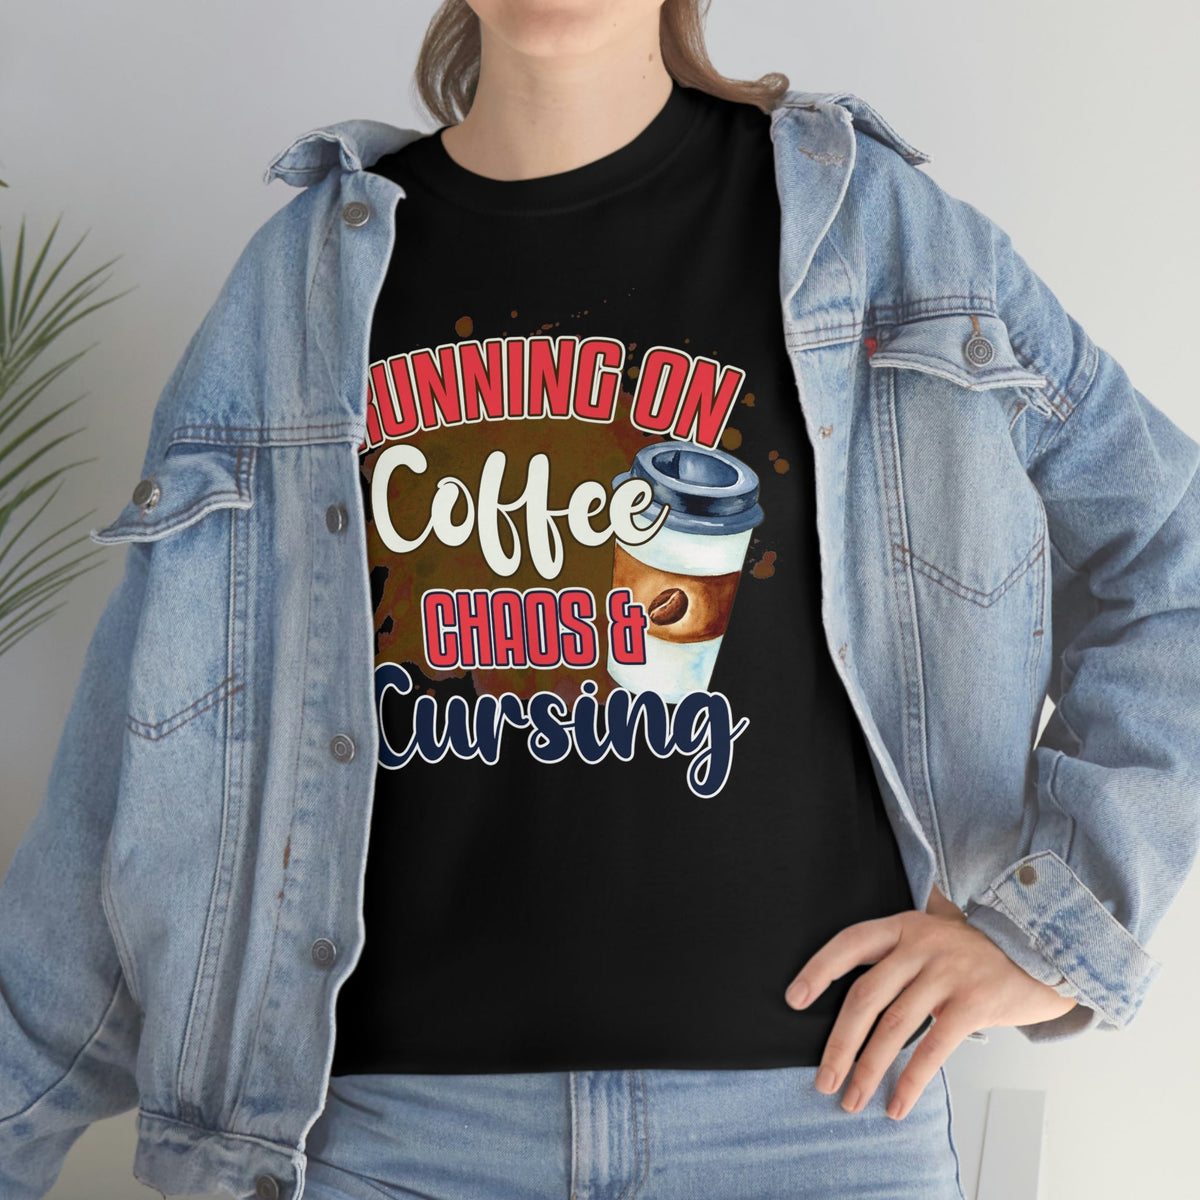 Running On Coffee, Cursing and Chaos Cotton Tee - Salty Medic Clothing Co.